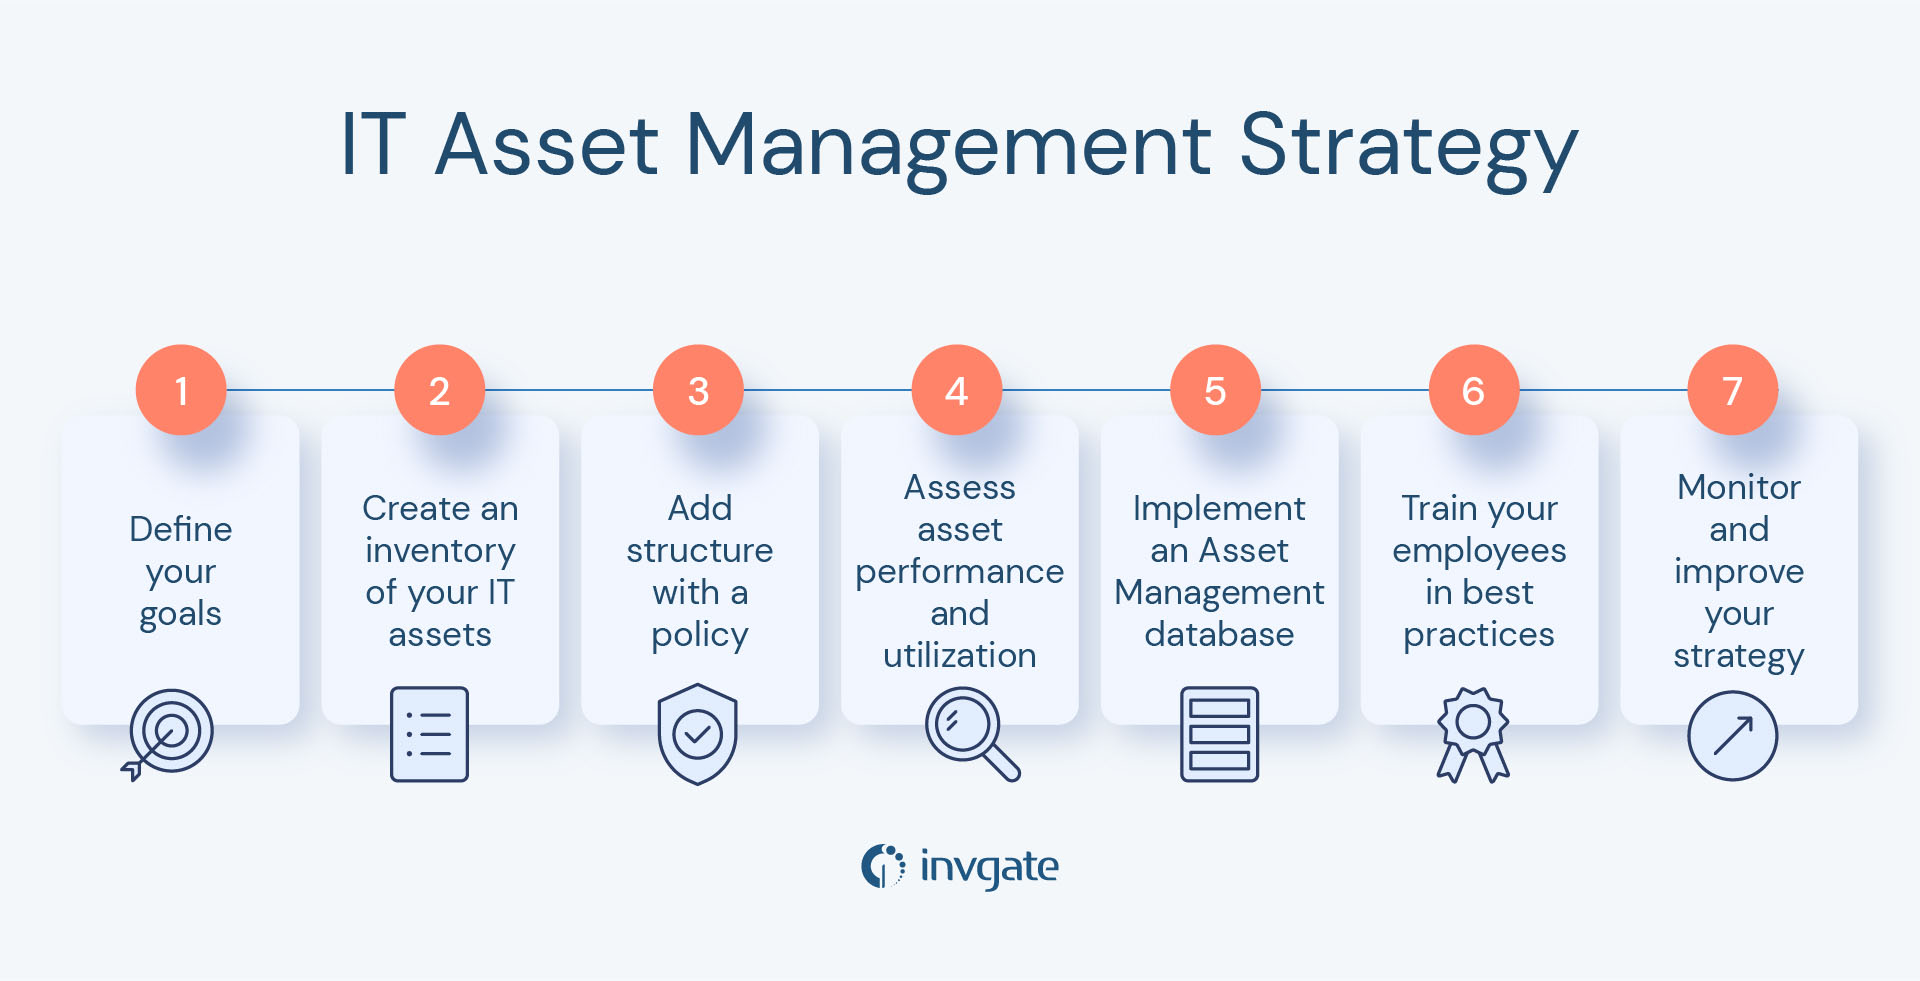 How to implement an IT Asset Management strategy